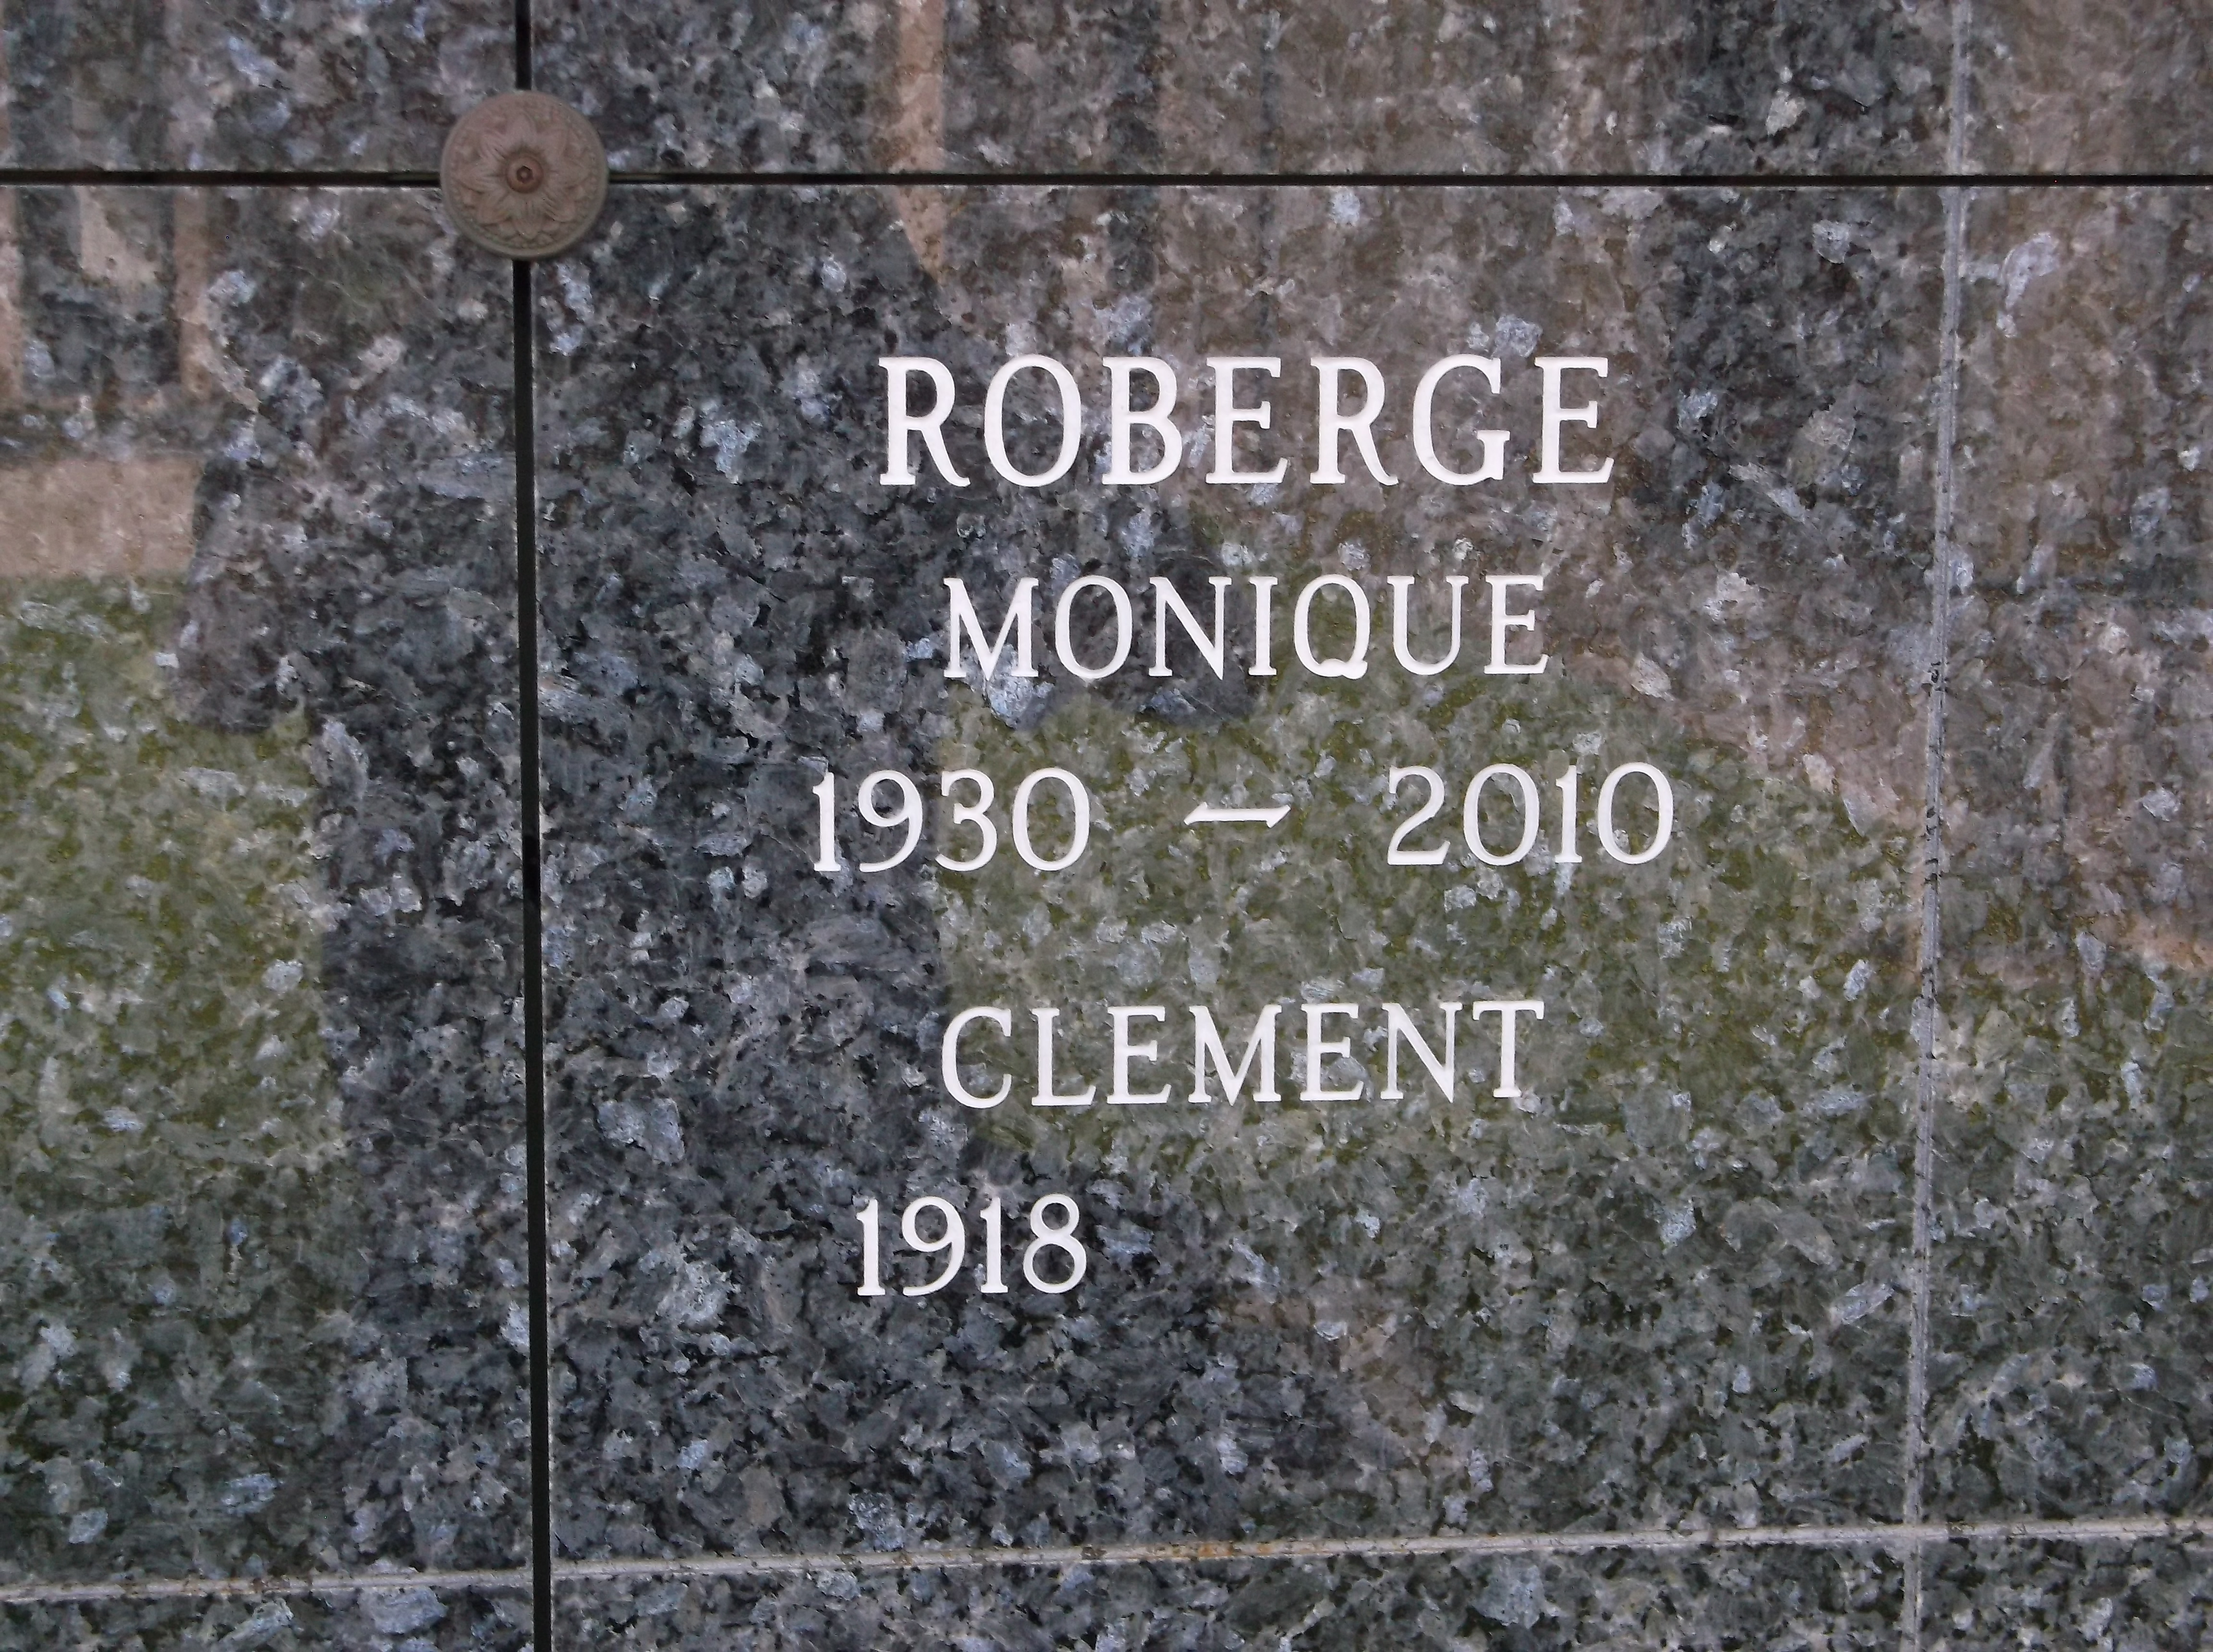 Clement Roberge